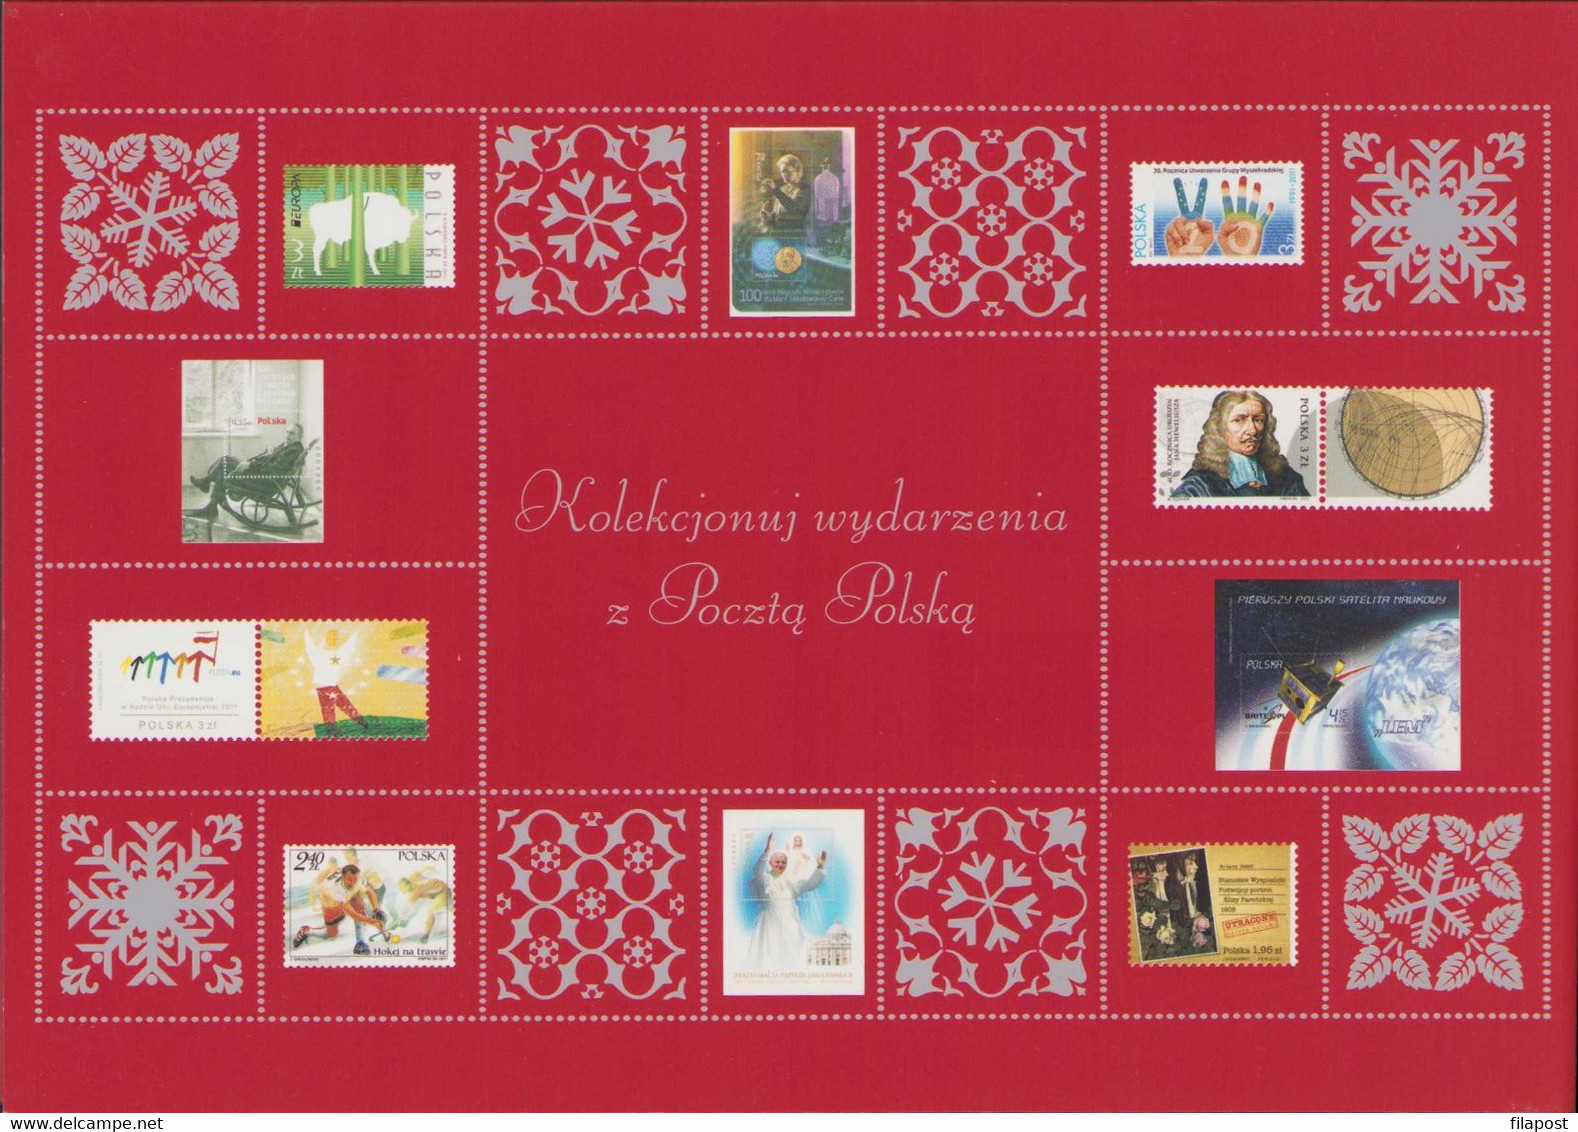 POLAND 2011 Booklet / Christmas Holiday, Saint Mary, Jesus, Santa Claus, Reindeer / 2 FDC + 2 Stamps MNH** - Libretti